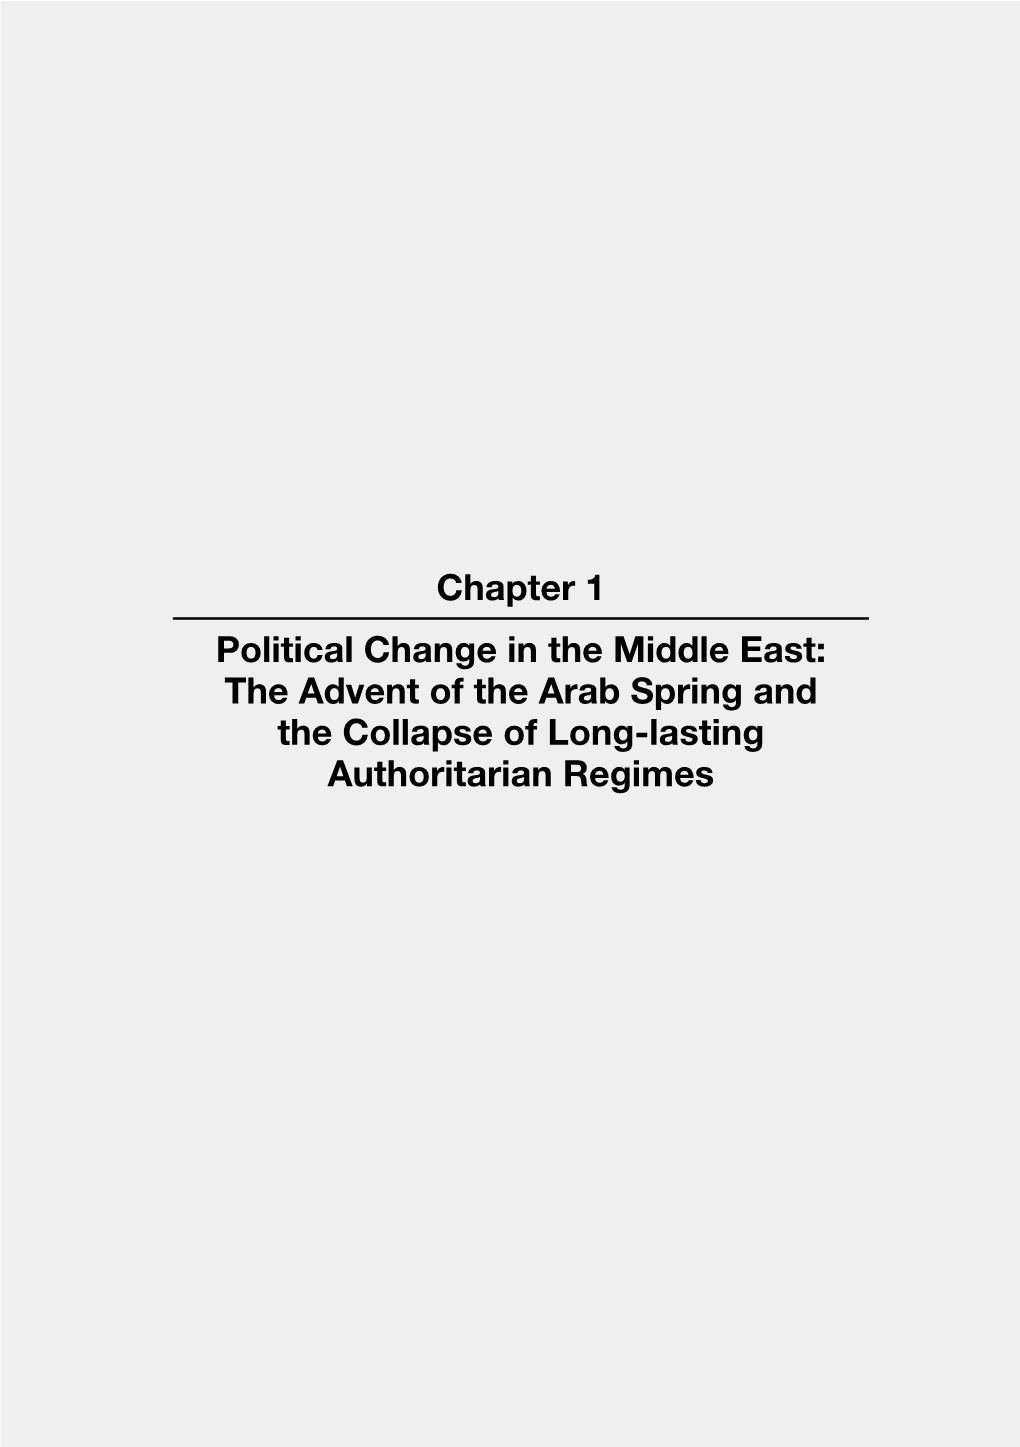 Chapter 1 Political Change in the Middle East: the Advent of the Arab Spring and the Collapse of Long-Lasting Authoritarian Regimes